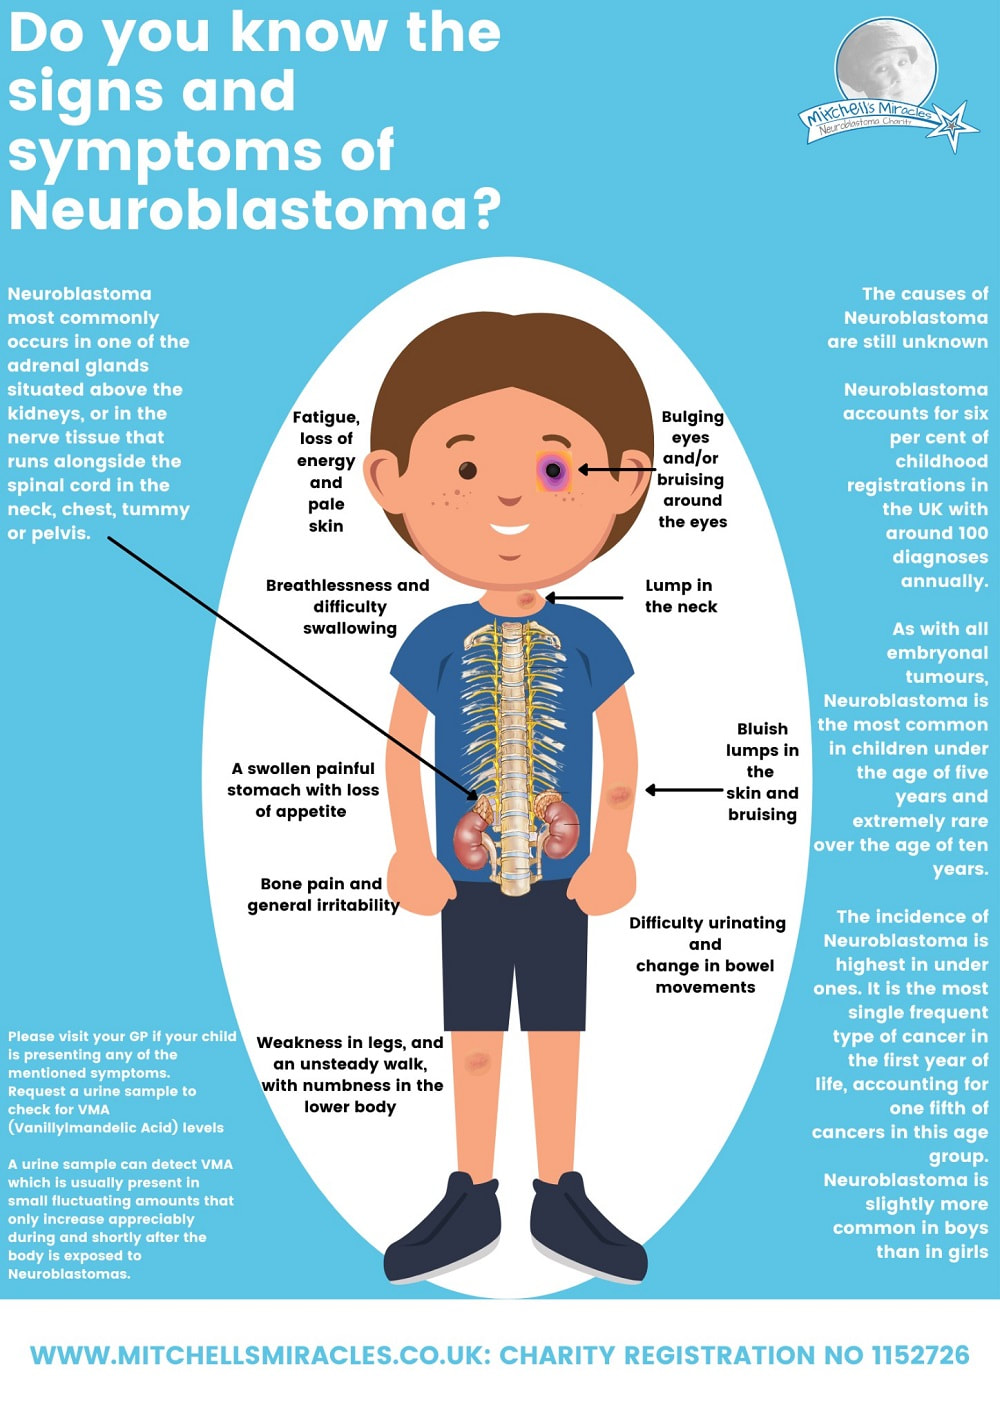 Info graphic_signs and symptoms of Neuroblastoma_Mitchells Miracles_Neuroblastoma childrens cancer charity for the UK